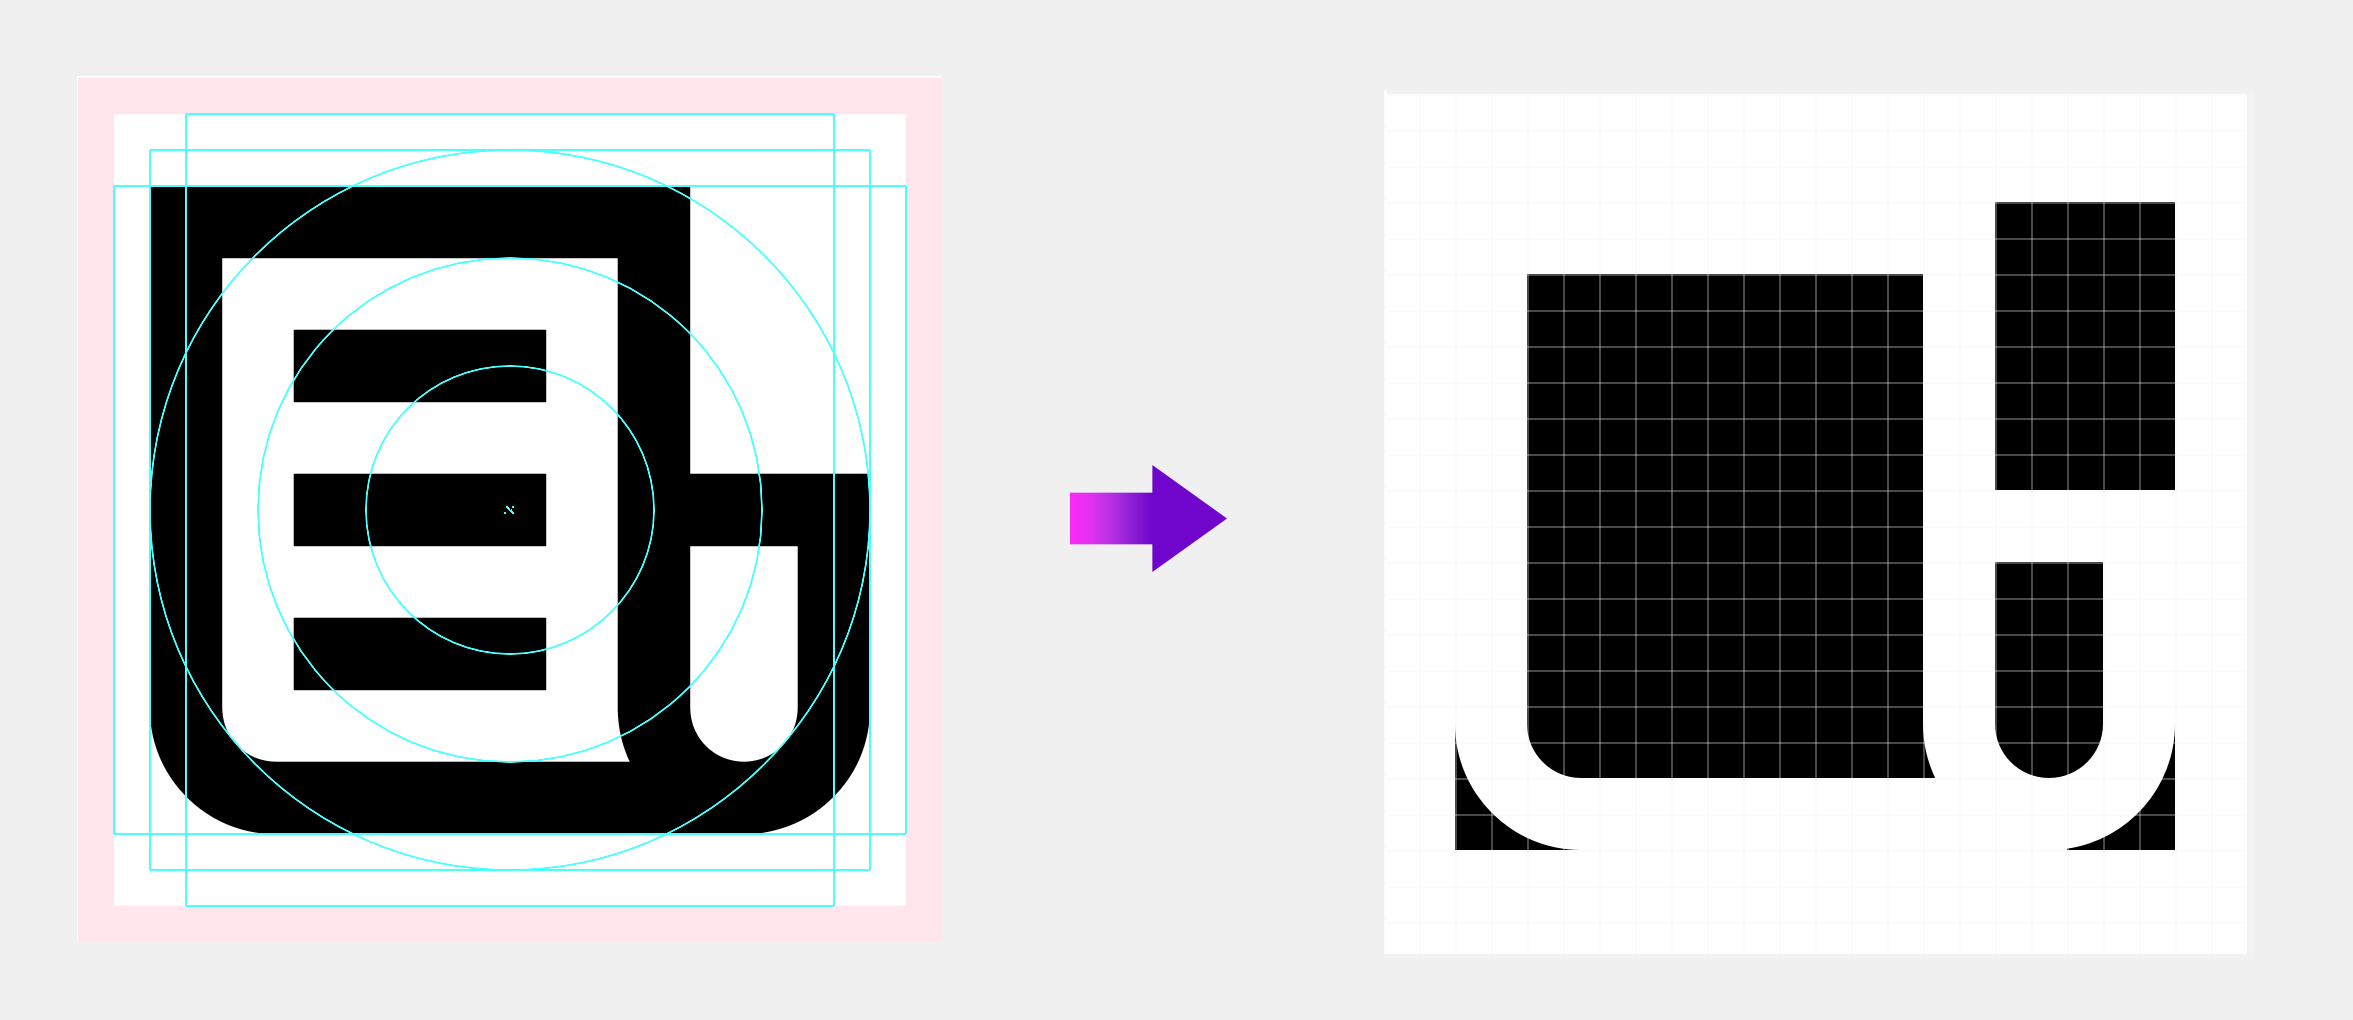 Preparing And Exporting Svg Icons In Sketch Design